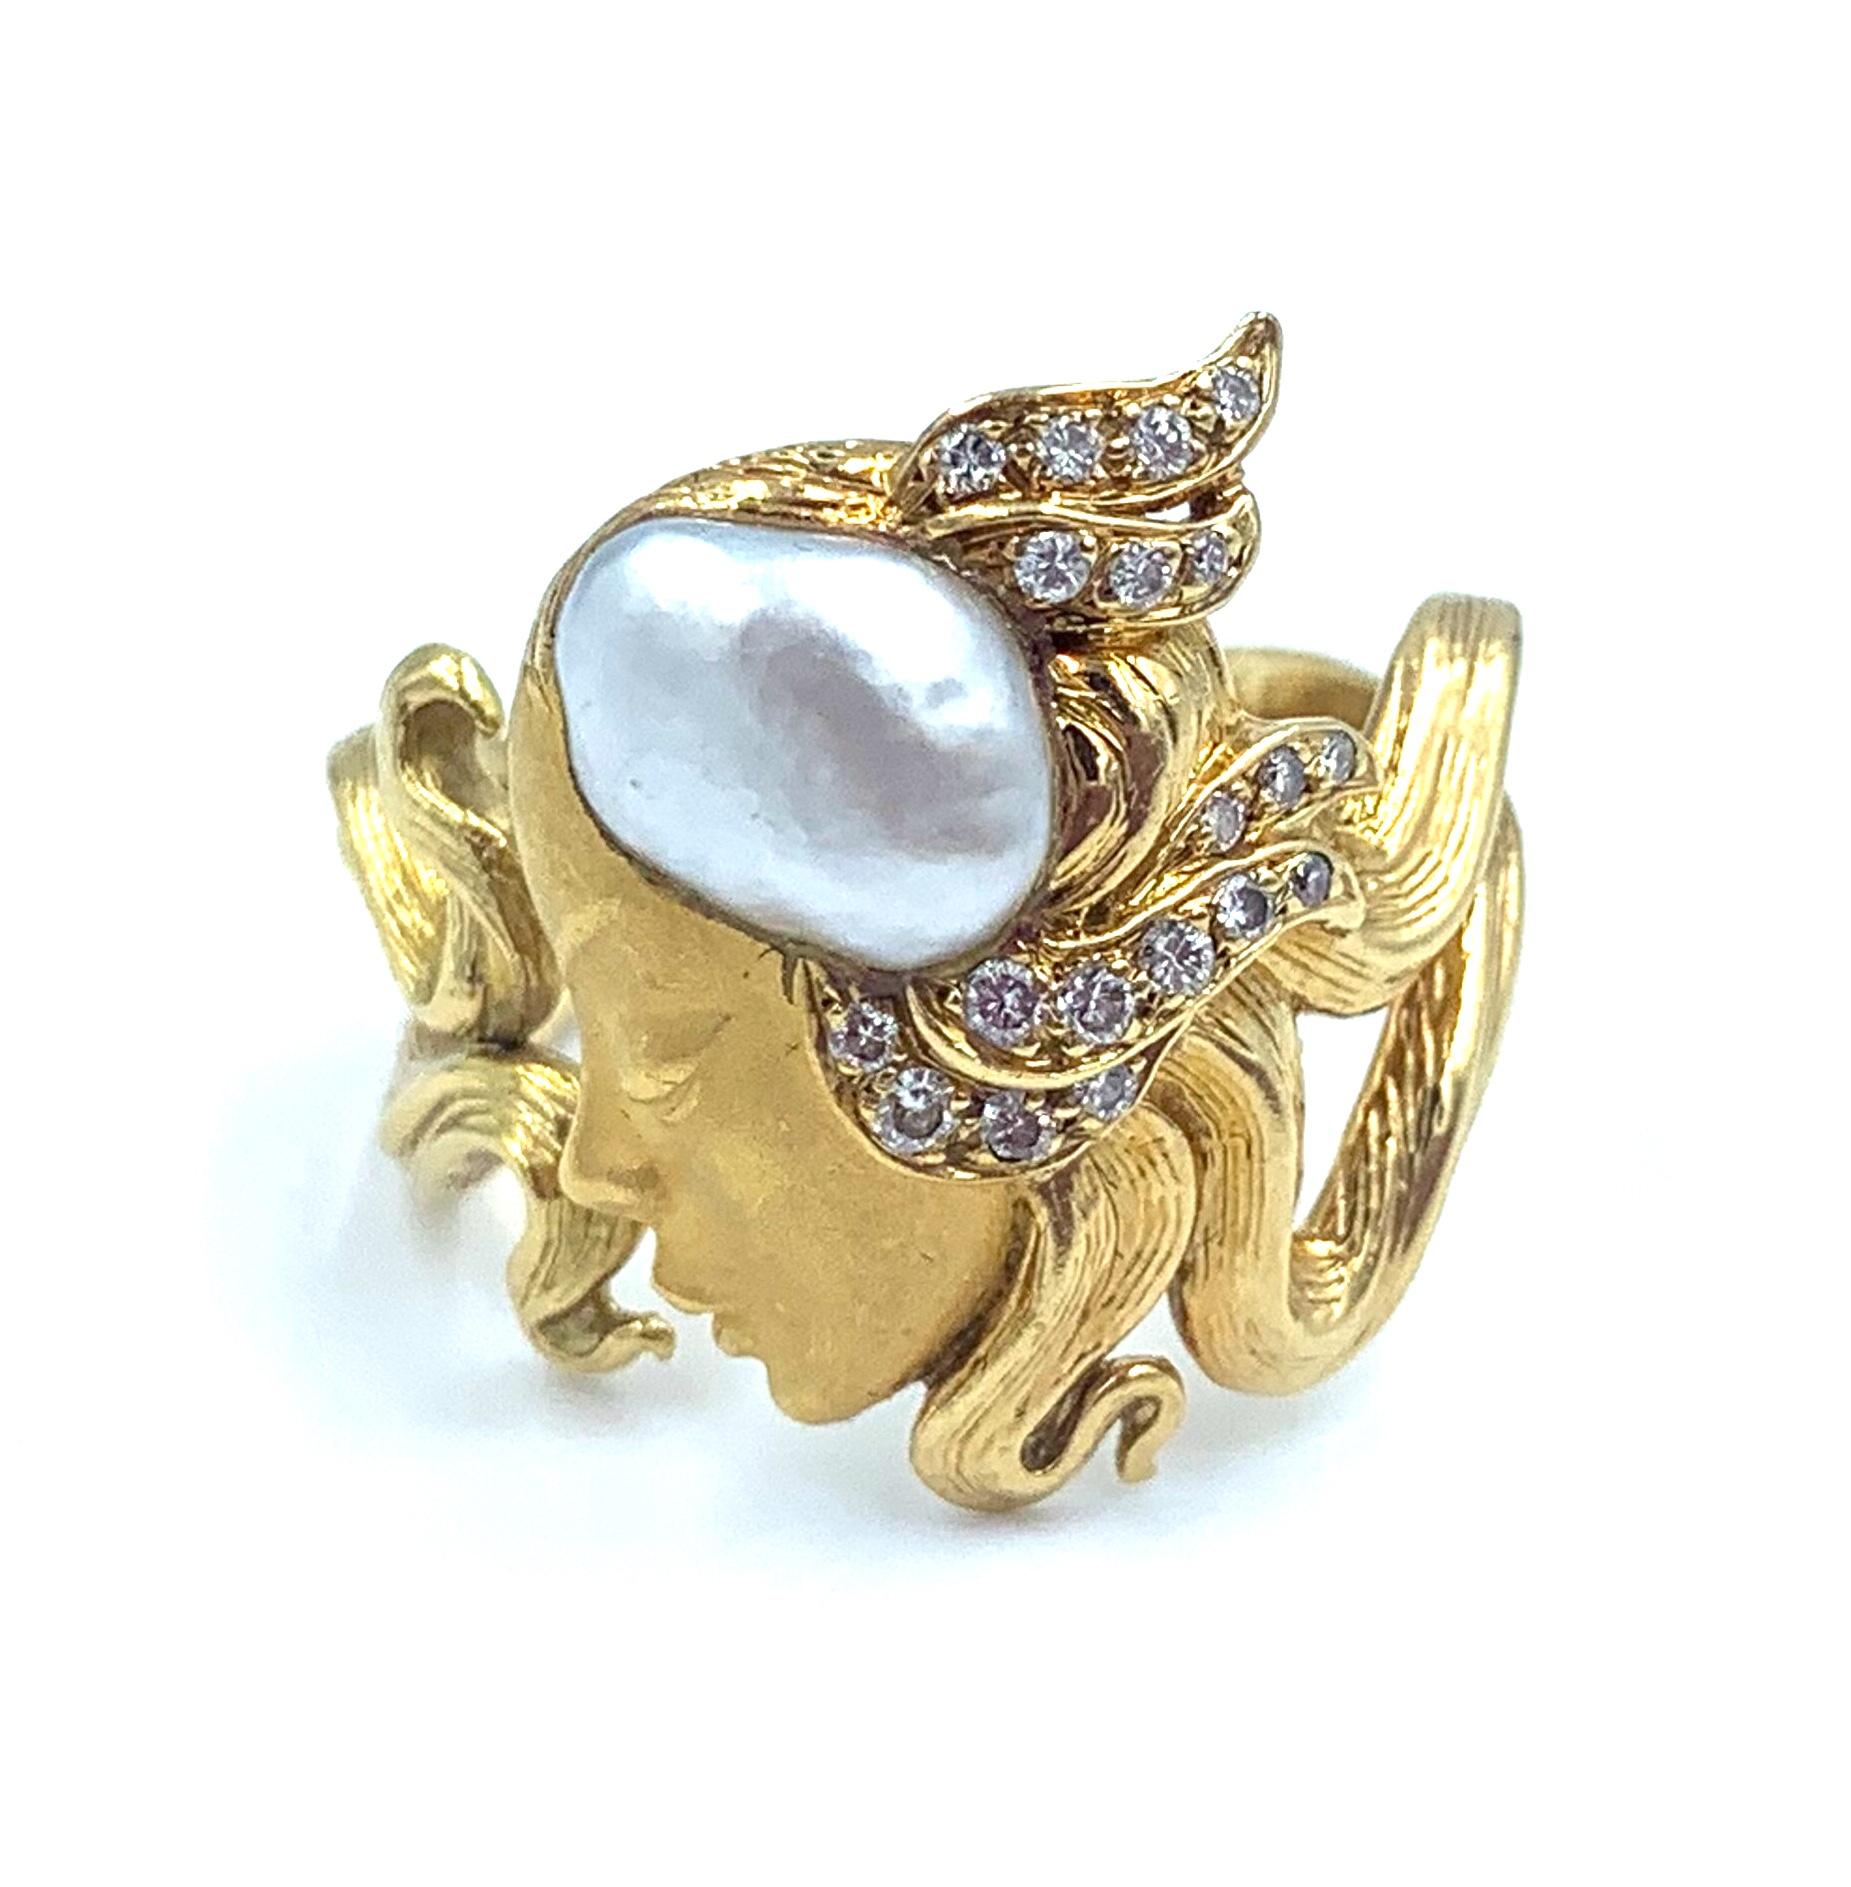 Beautiful Maidenform 18 kt yellow gold ring adorned with a pearl and diamonds by the famous Spanish Jewelry House of Carrera y Carrera.

Size 8.5 
0.20cts of diamonds 